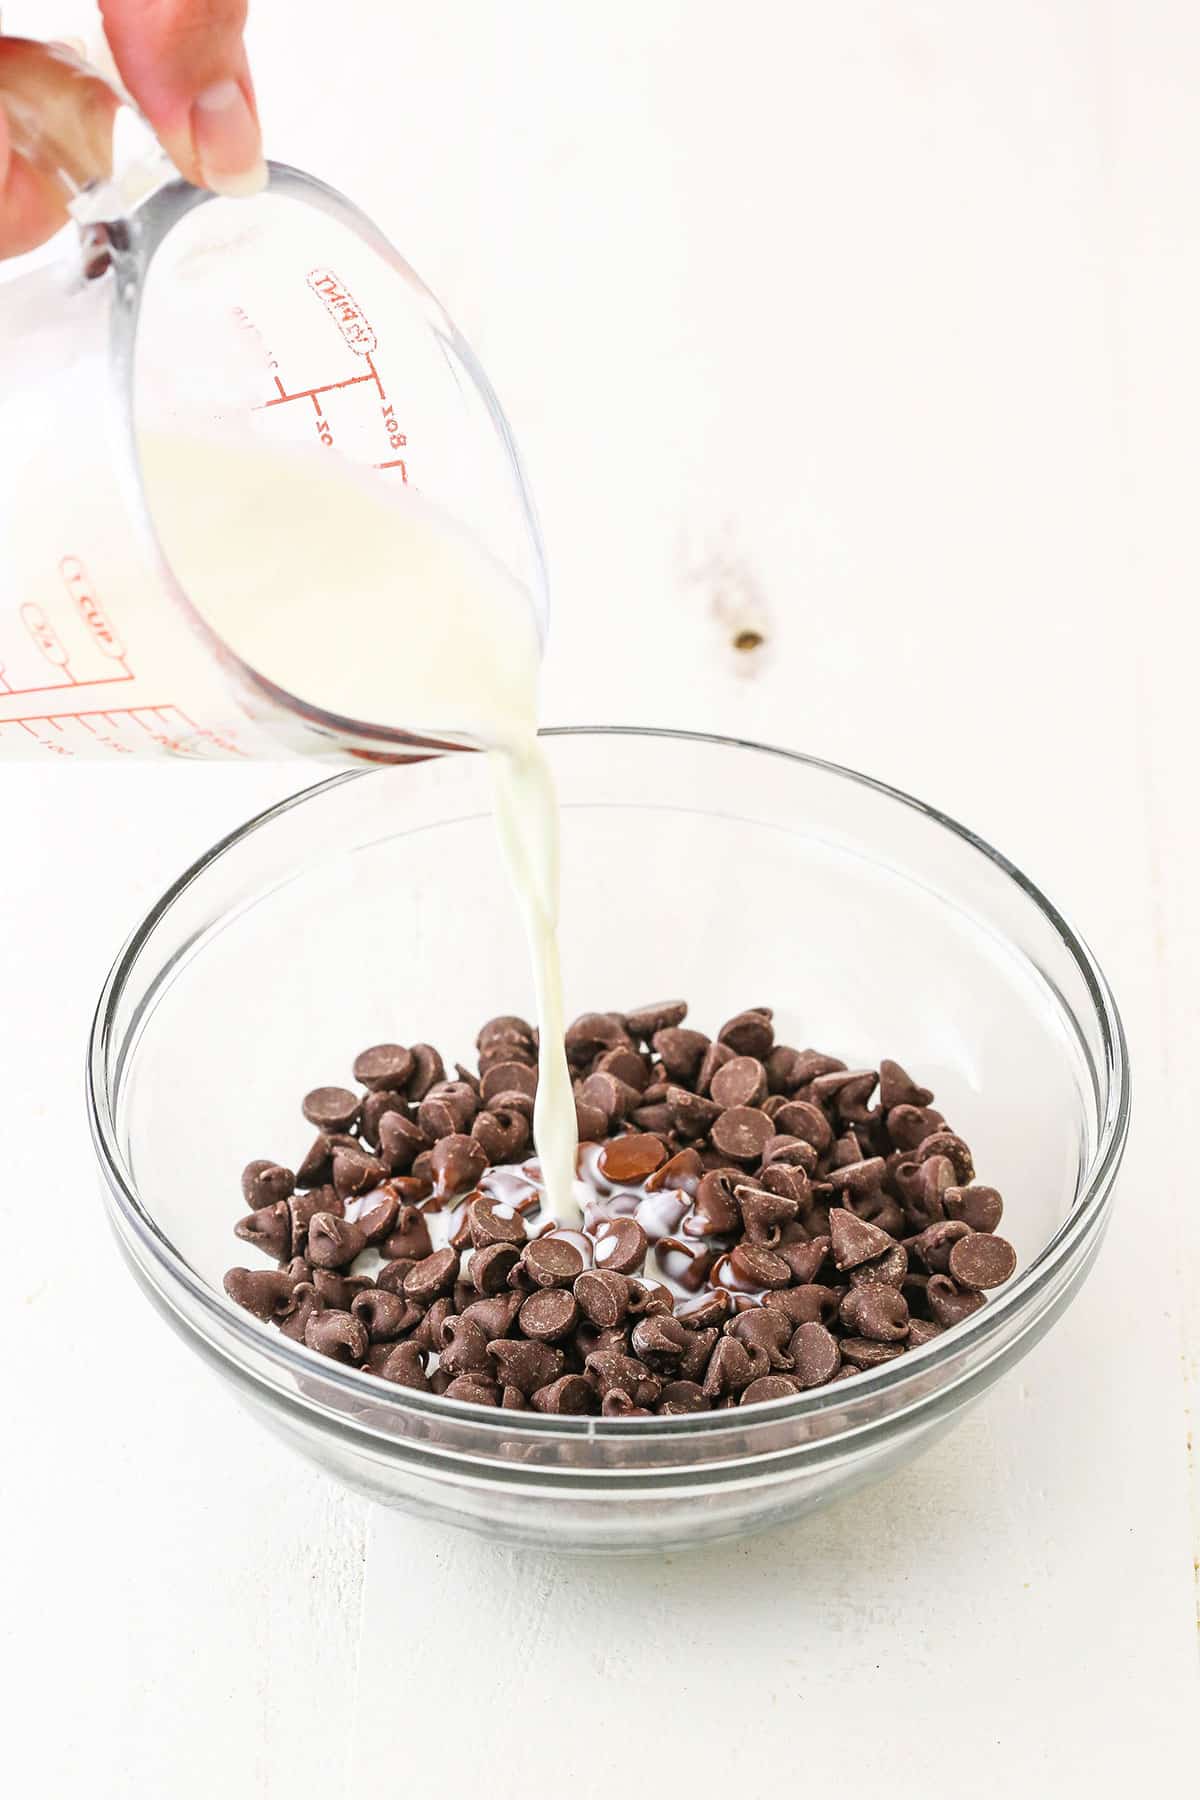 Pouring the heavy whipping cream over chocolate chips in a glass bowl